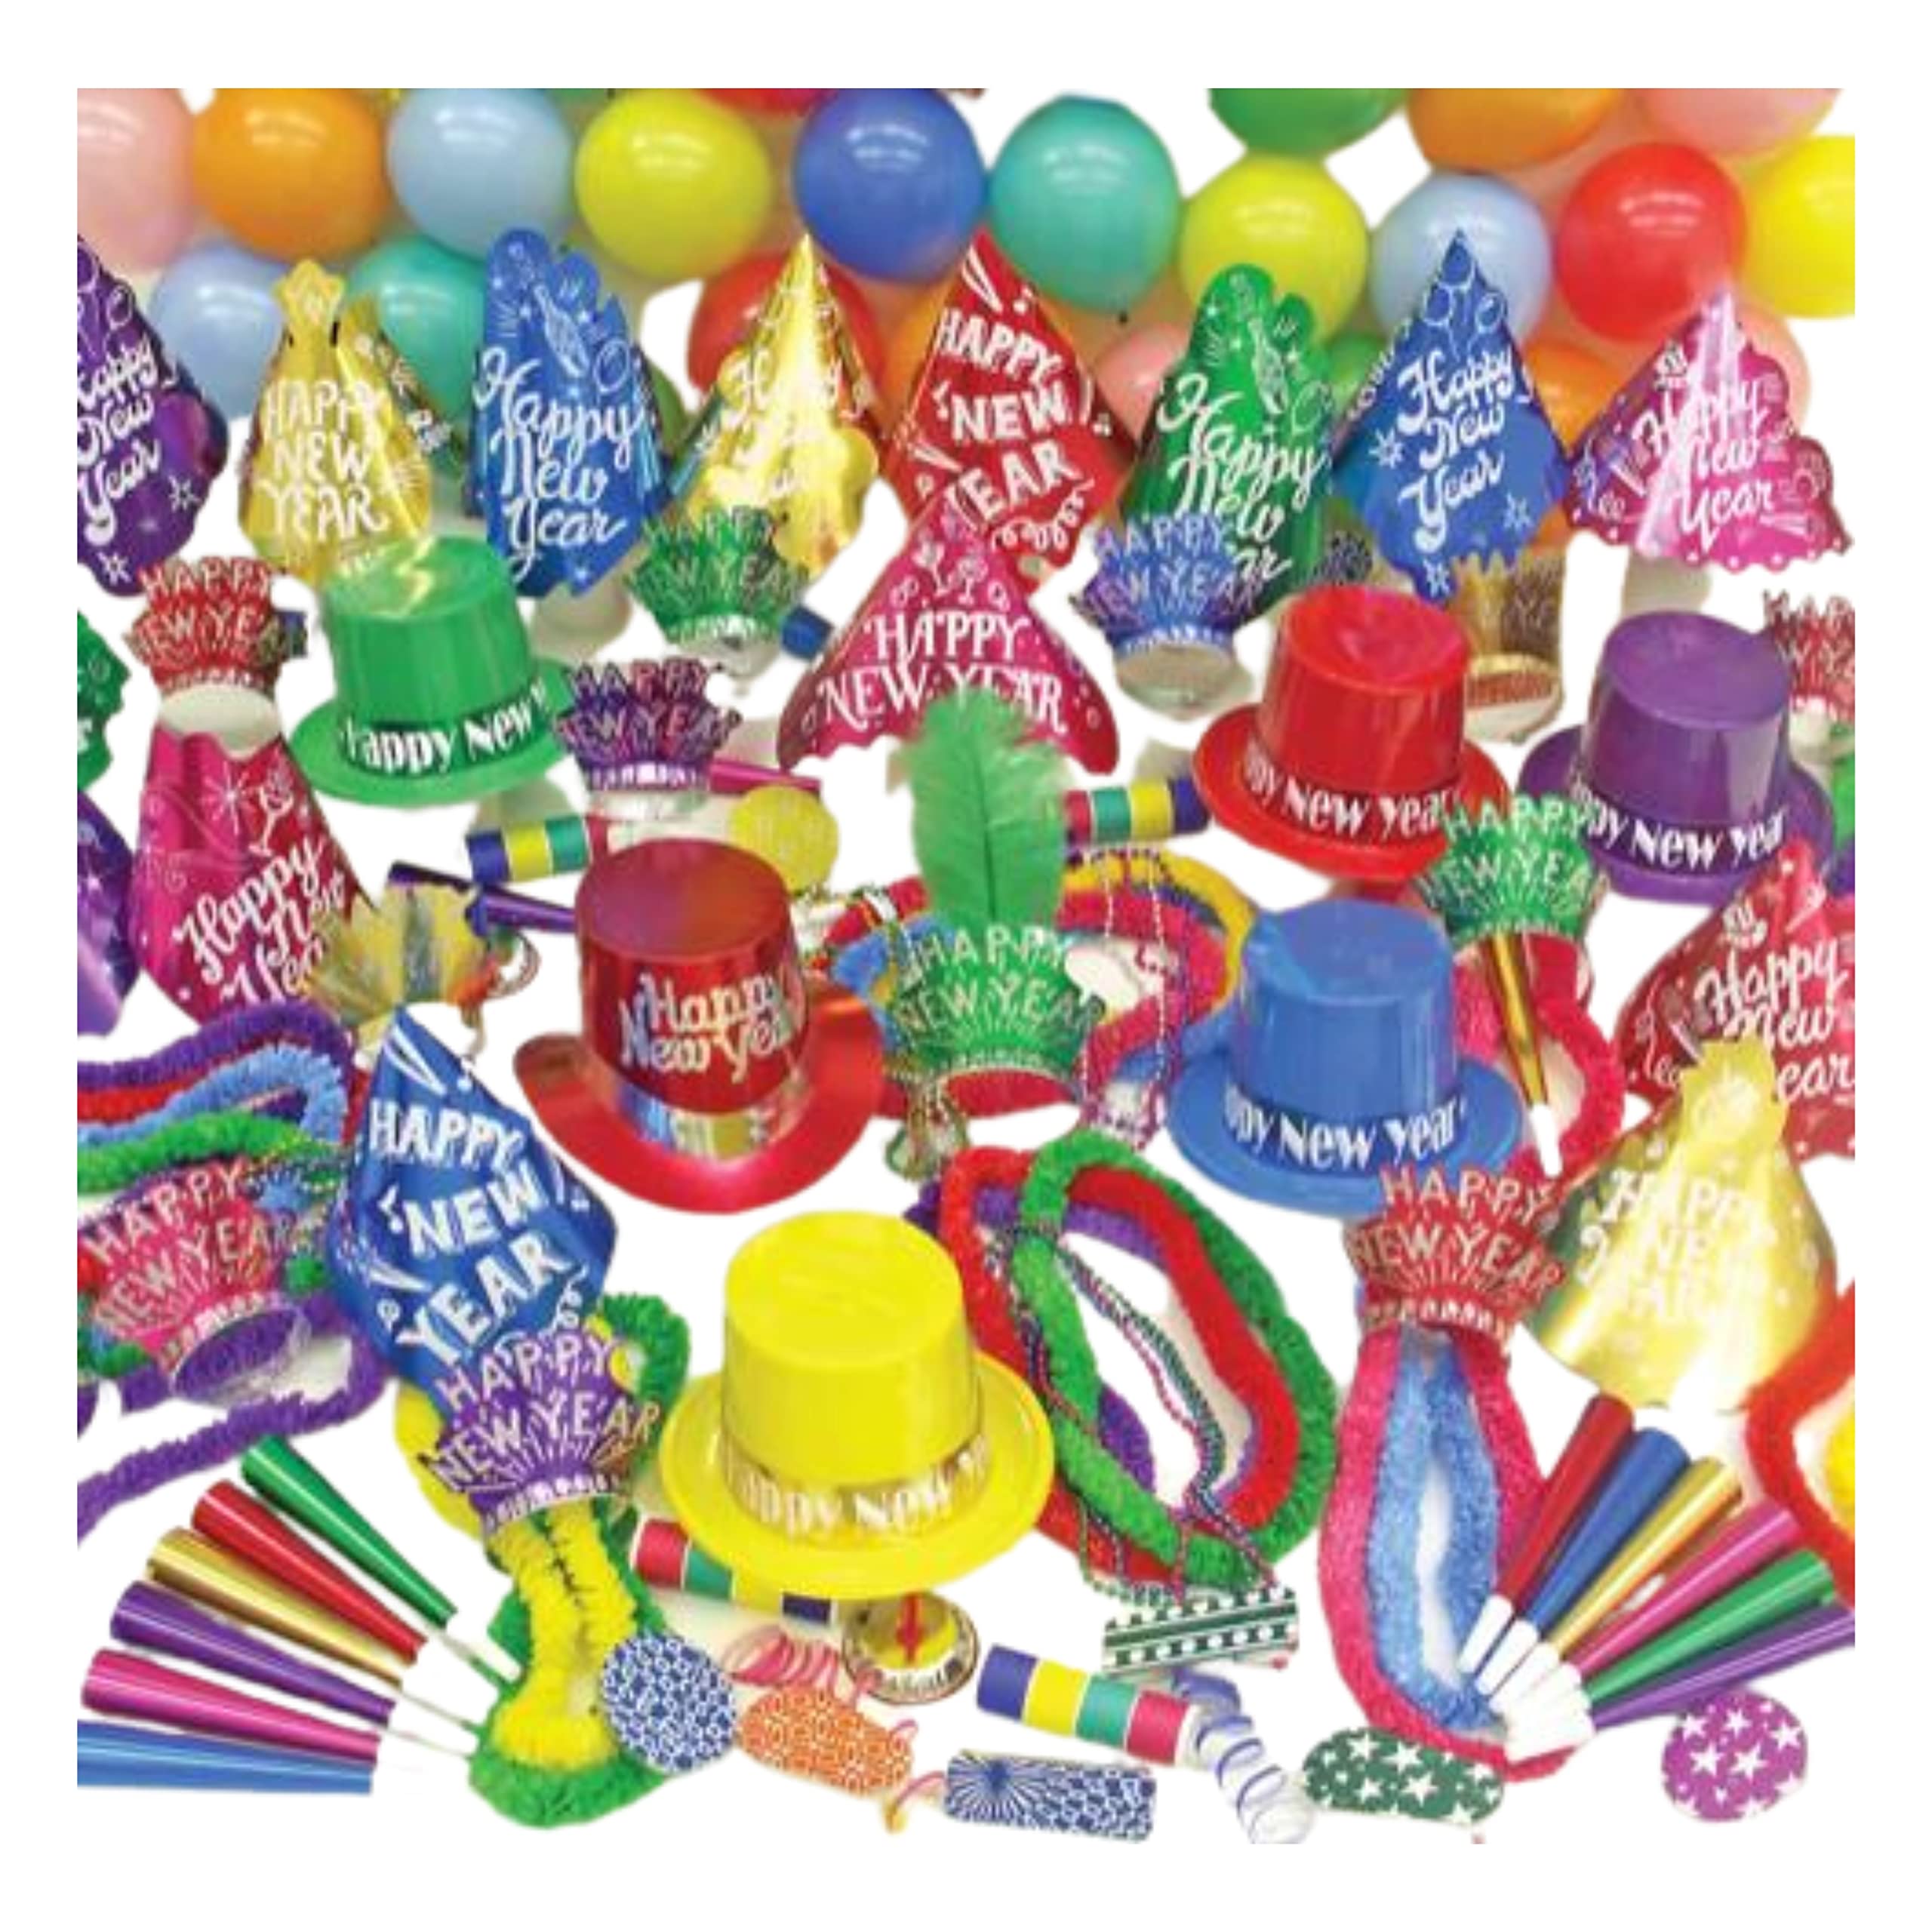 Vibrant Sensation Party Kit for 100 New Years